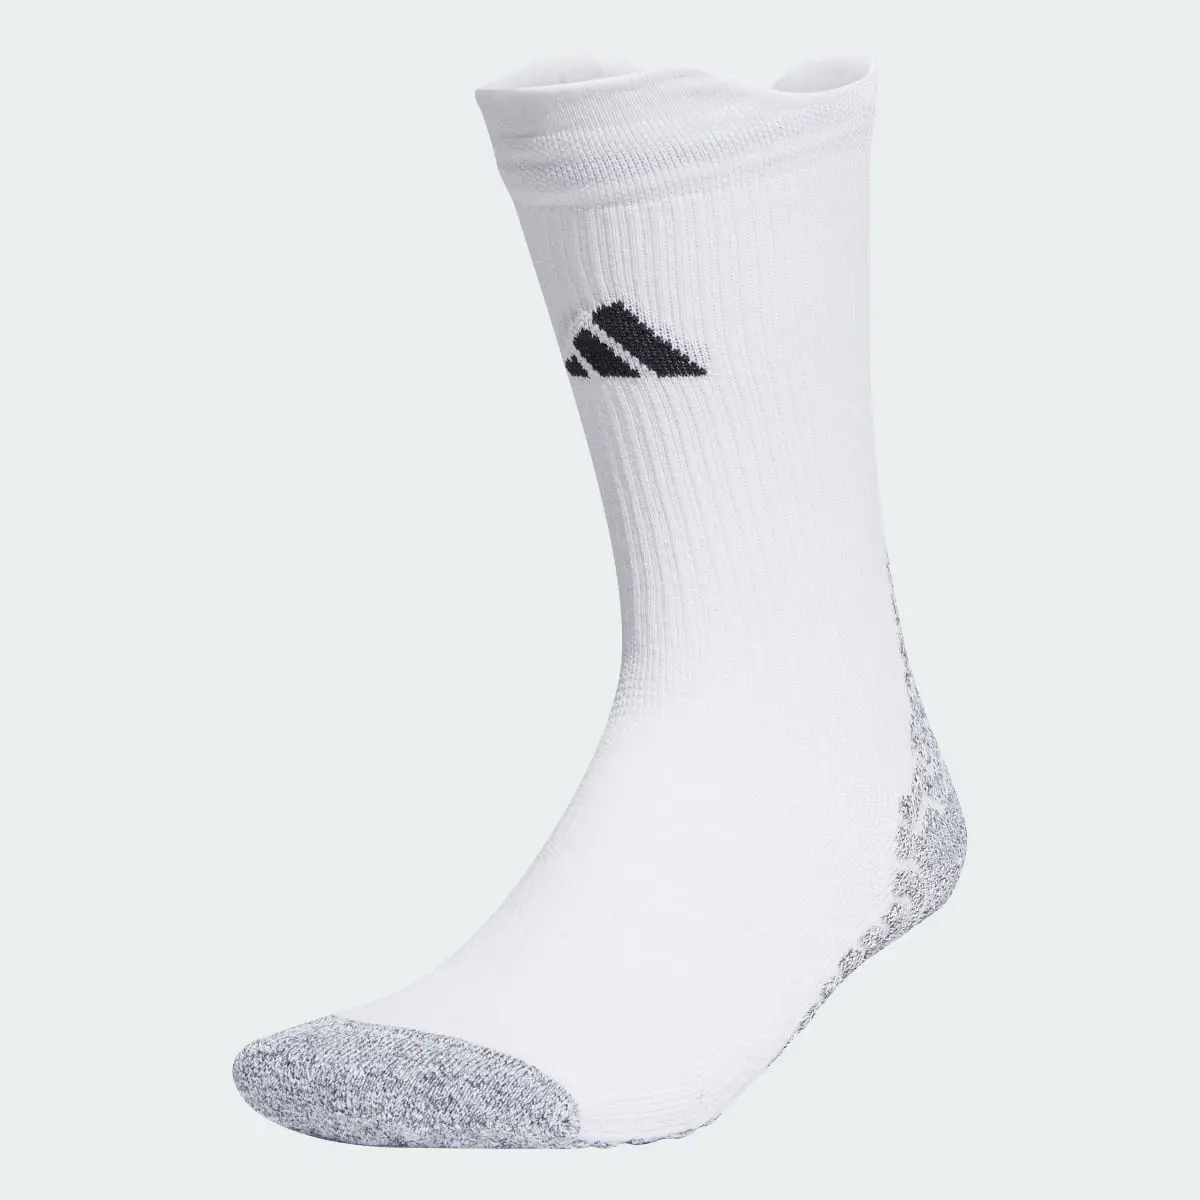 Adidas Chaussettes rembourrées maille adidas Football GRIP Performance. 1